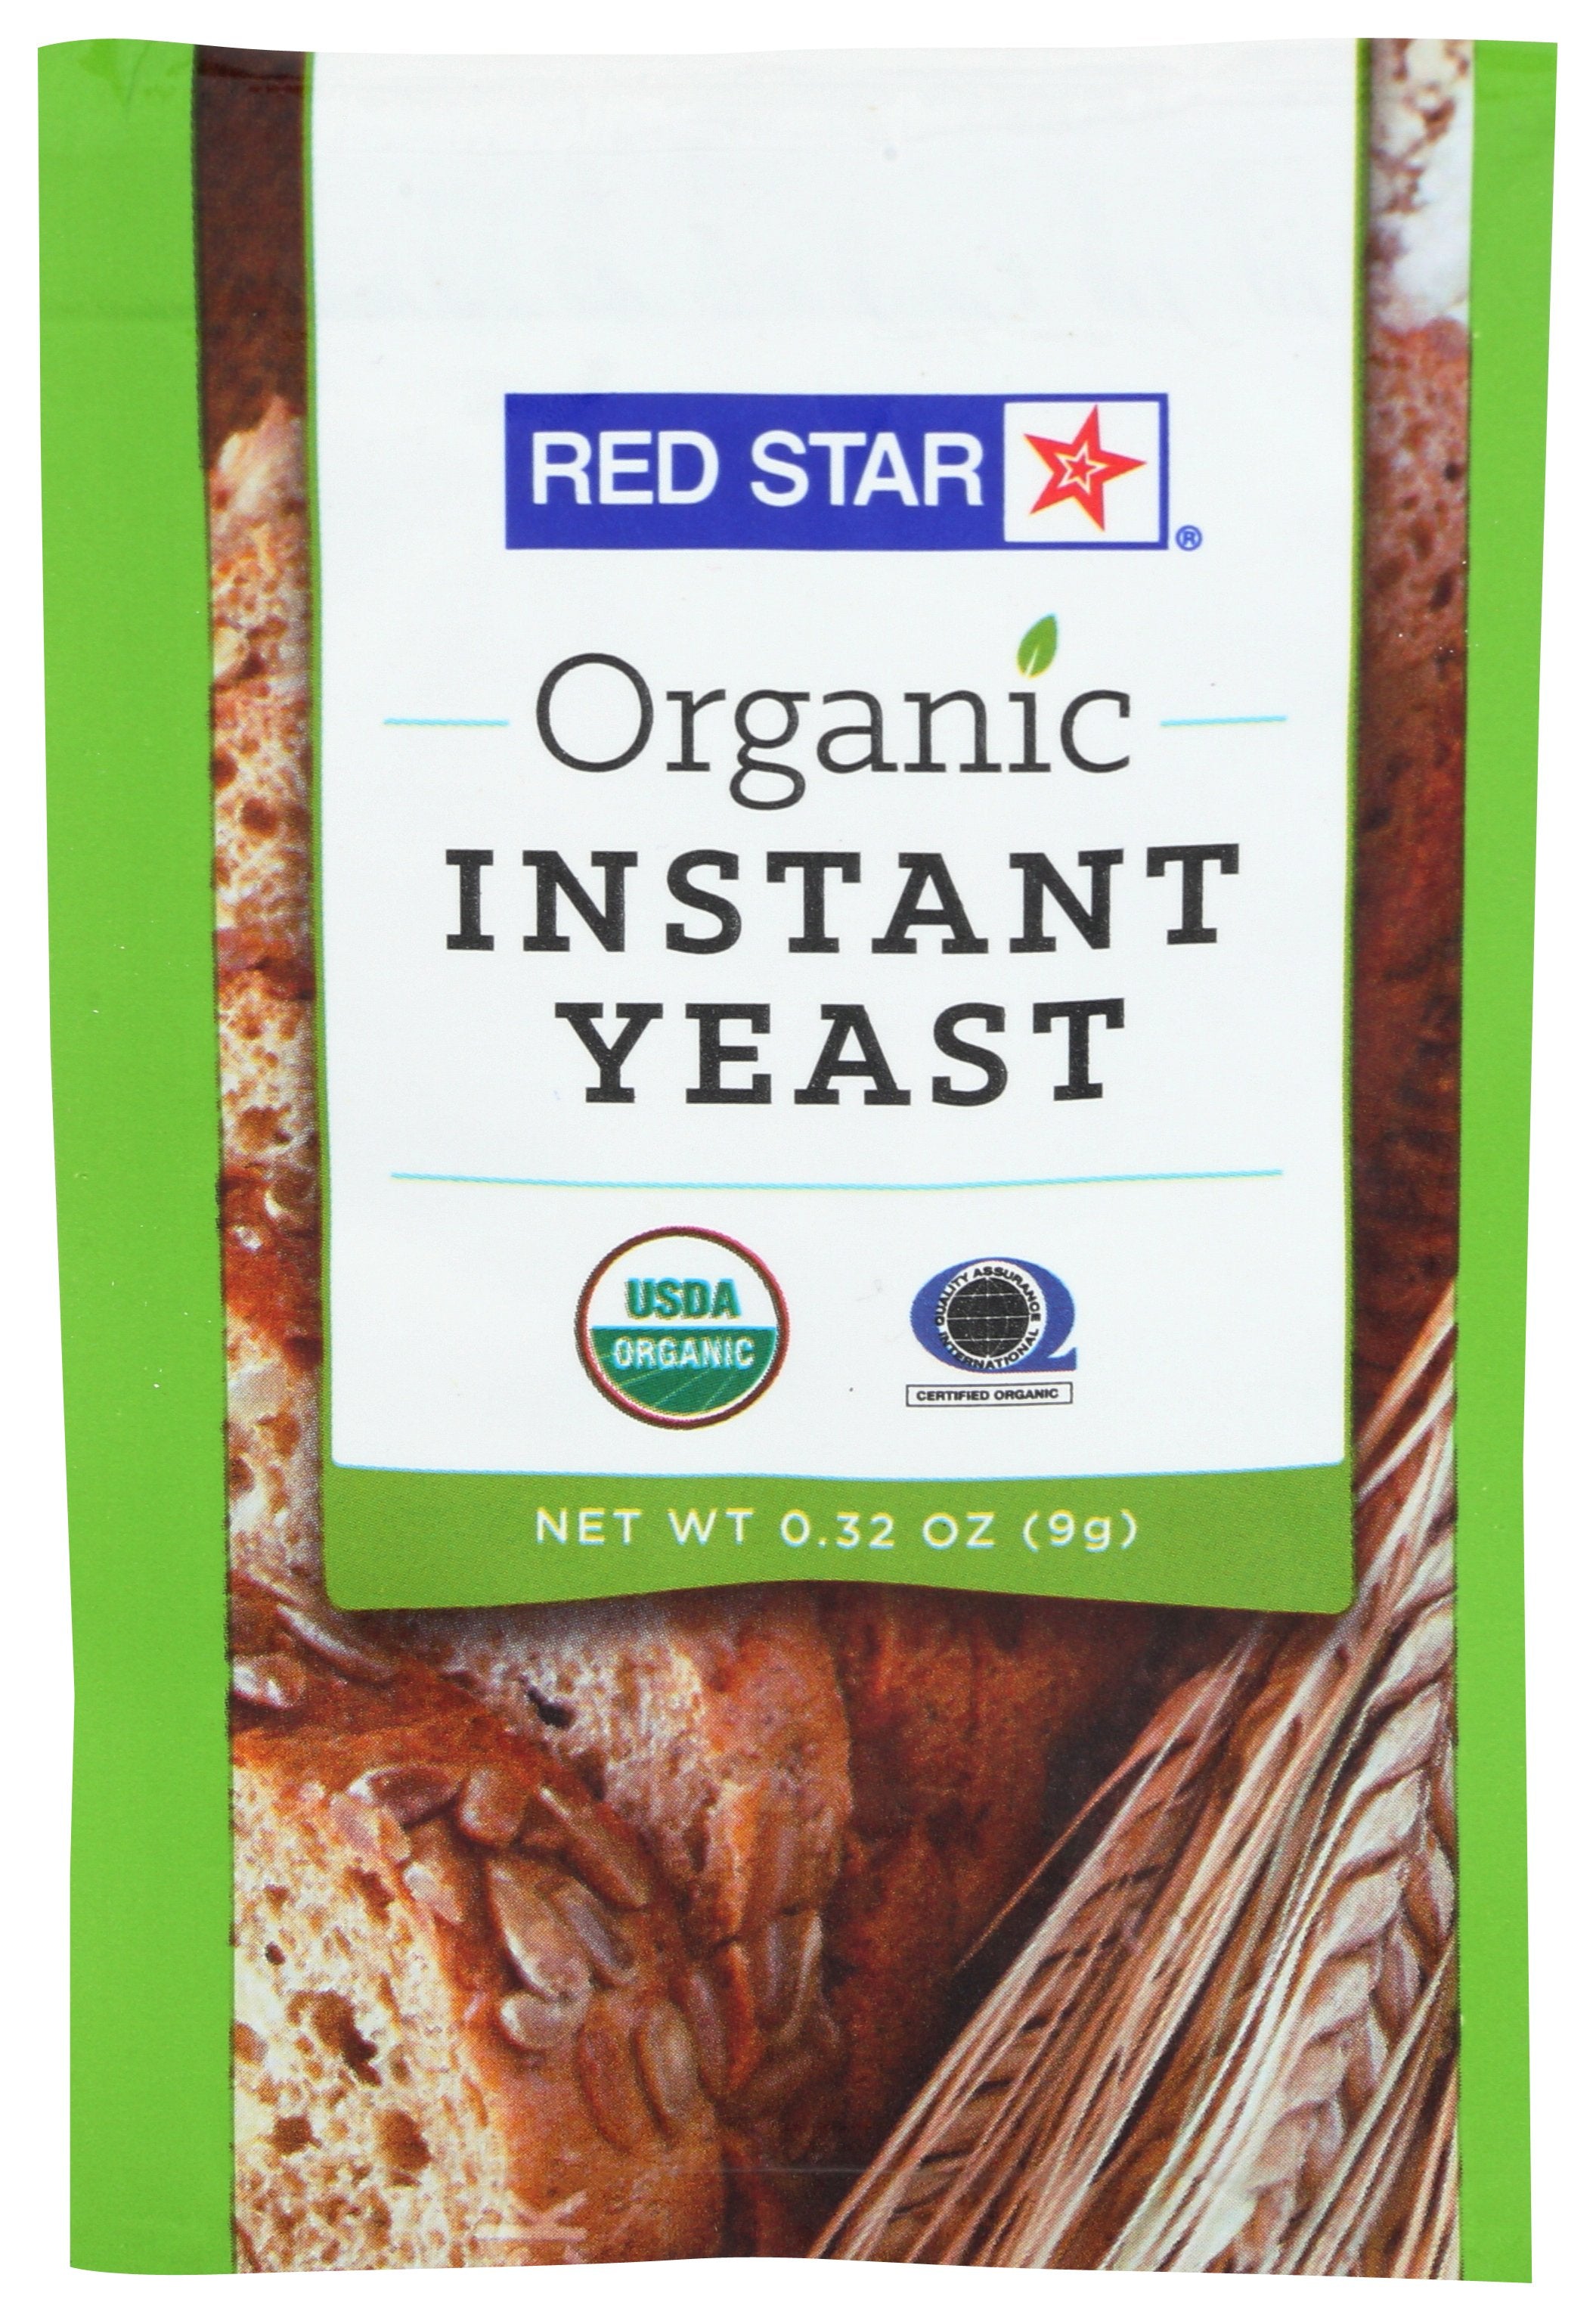 RED STAR YEAST ORG - Case of 20